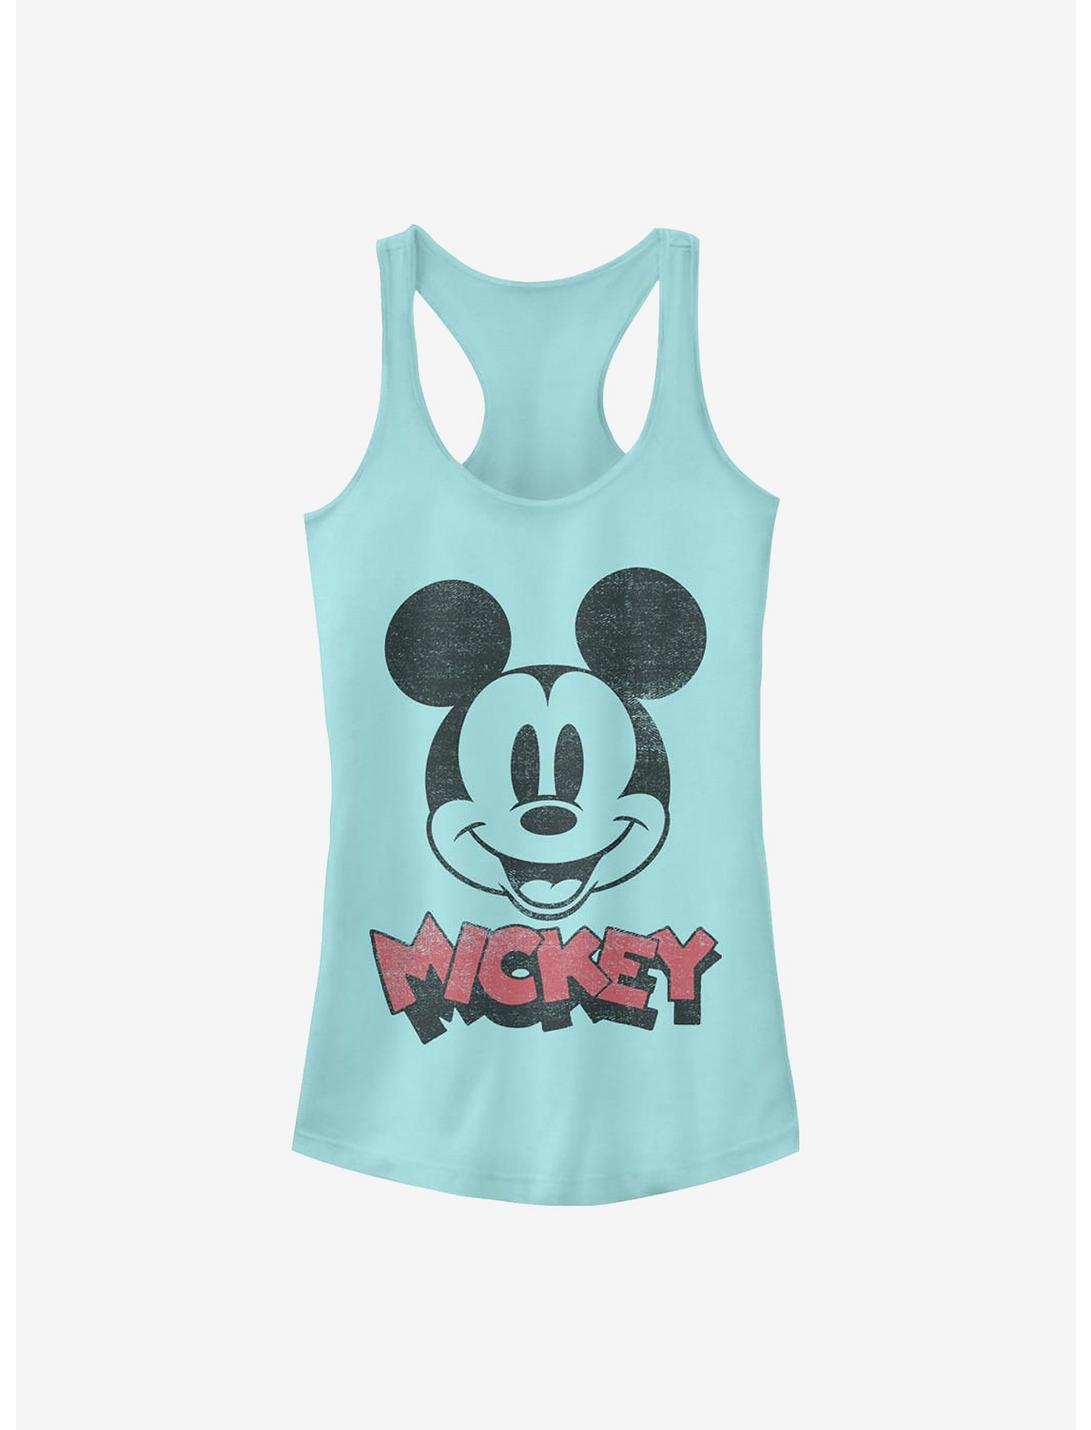 Disney Mickey Mouse Heads Up Girls Tank, CANCUN, hi-res